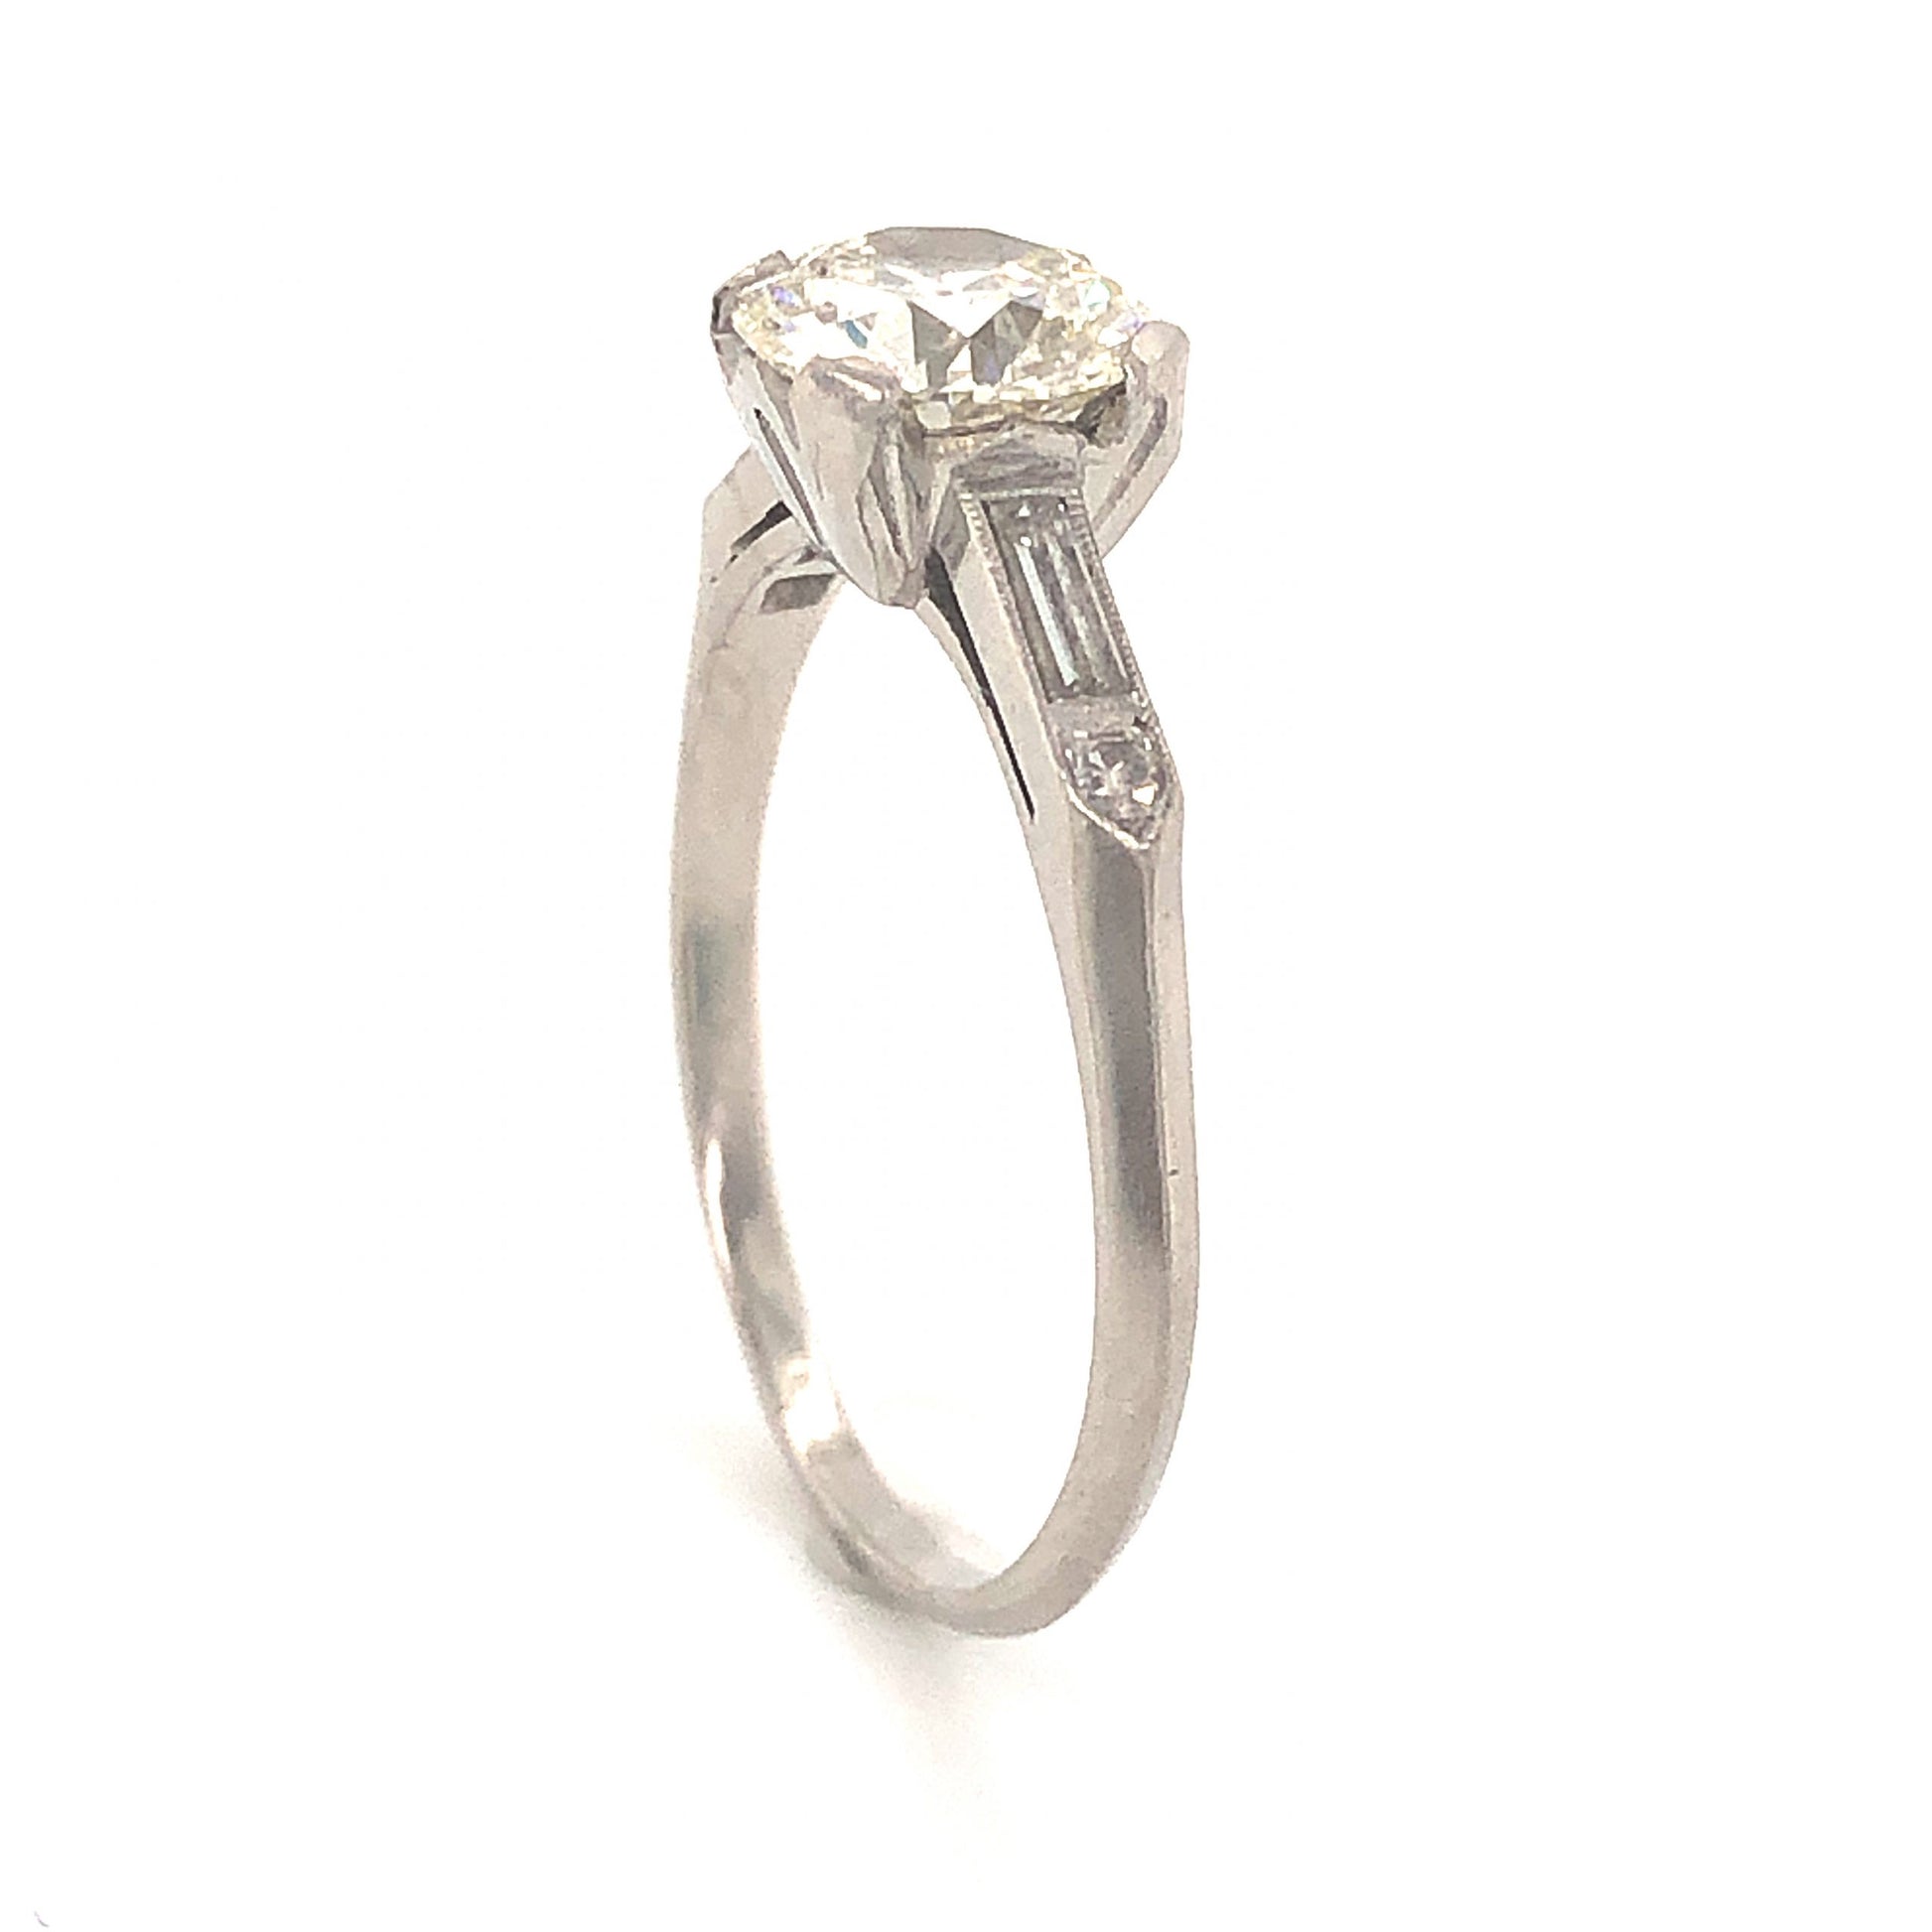 1.14 Art Deco Diamond Engagement Ring in PlatinumComposition: PlatinumRing Size: 7Total Diamond Weight: 1.47 ctTotal Gram Weight: 3.3 gInscription: 900 PLAT 100 IRID